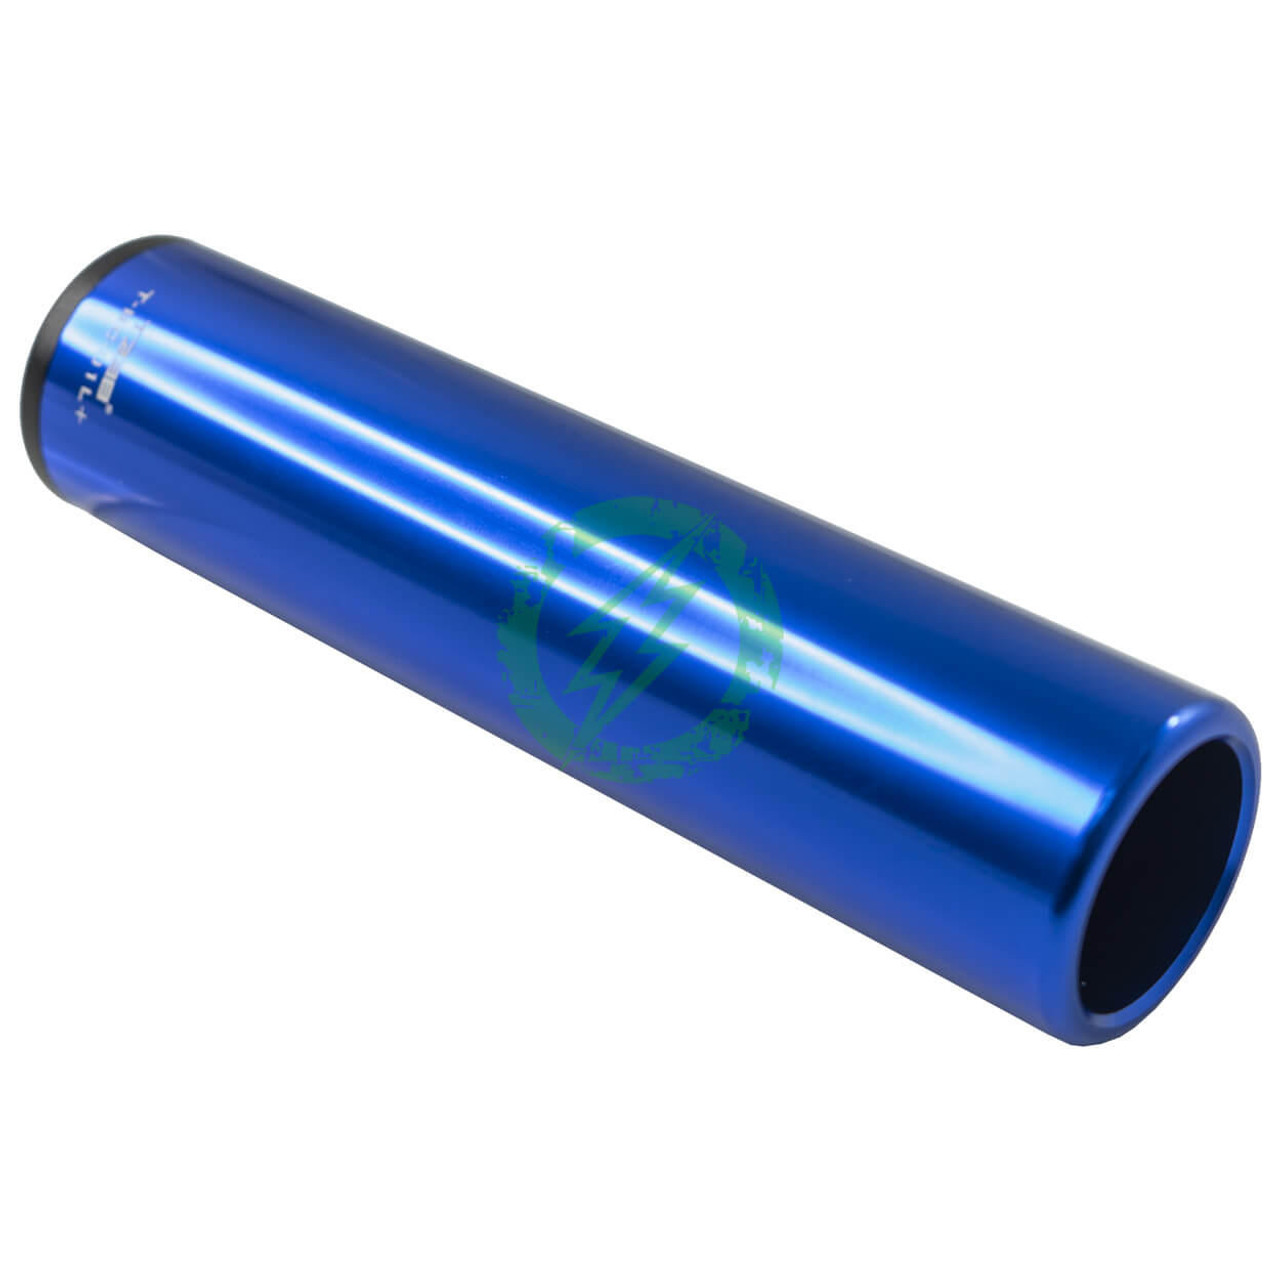  T238 Bluecan RGB Tracer | 123mm / 157mm Options 